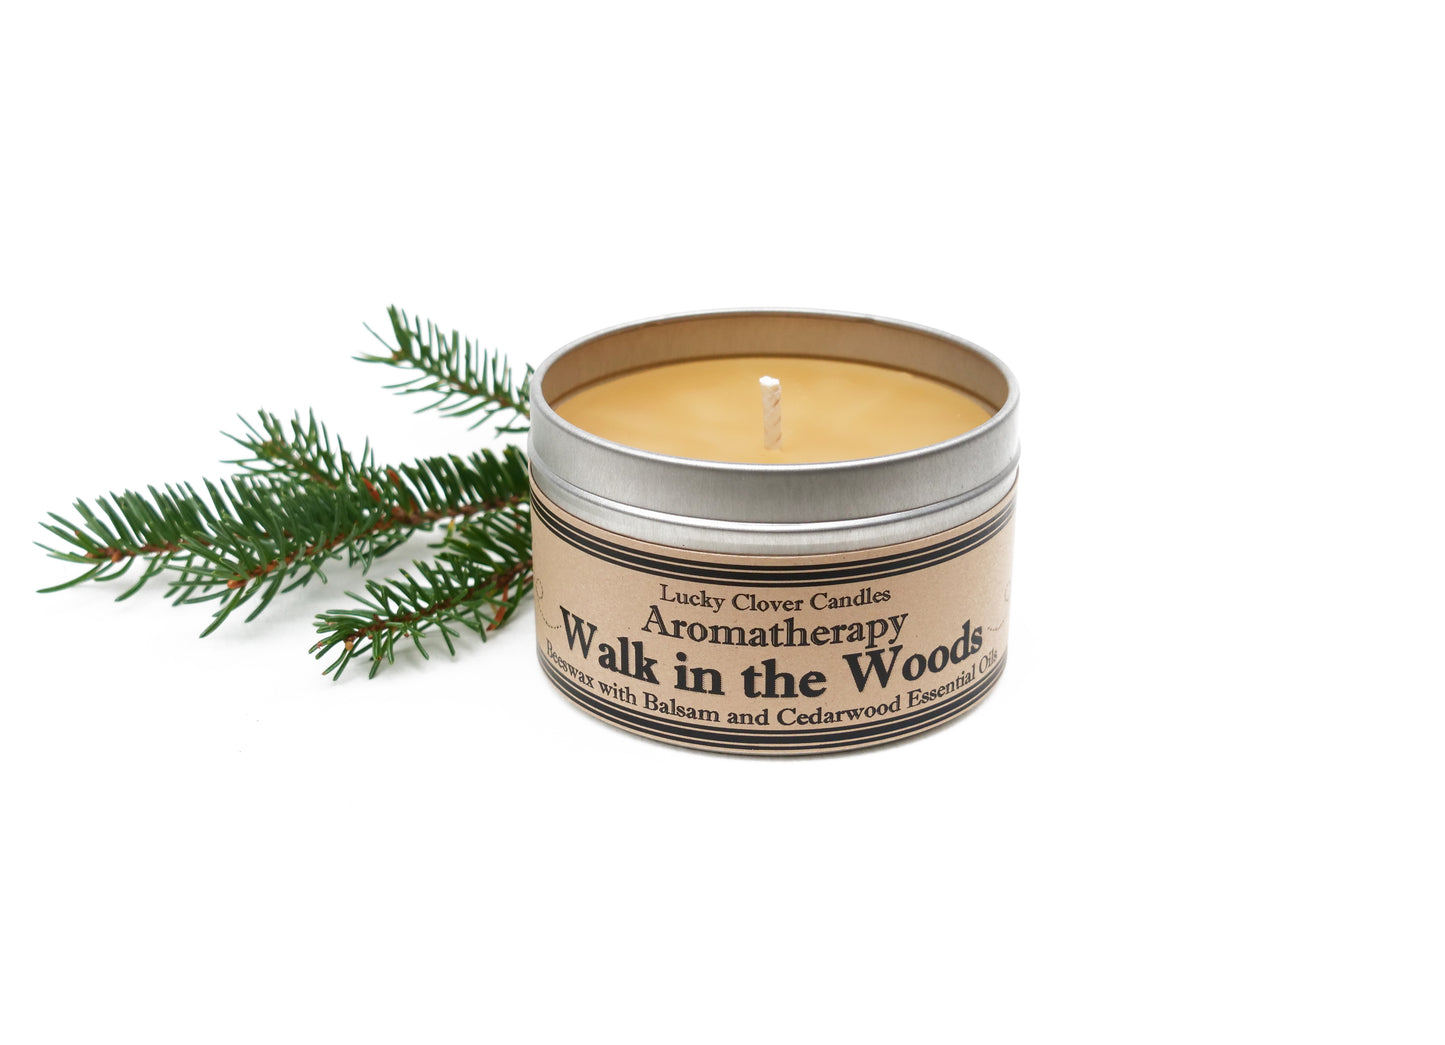 Walk in the Woods Aromatherapy Beeswax Candle - 8 oz